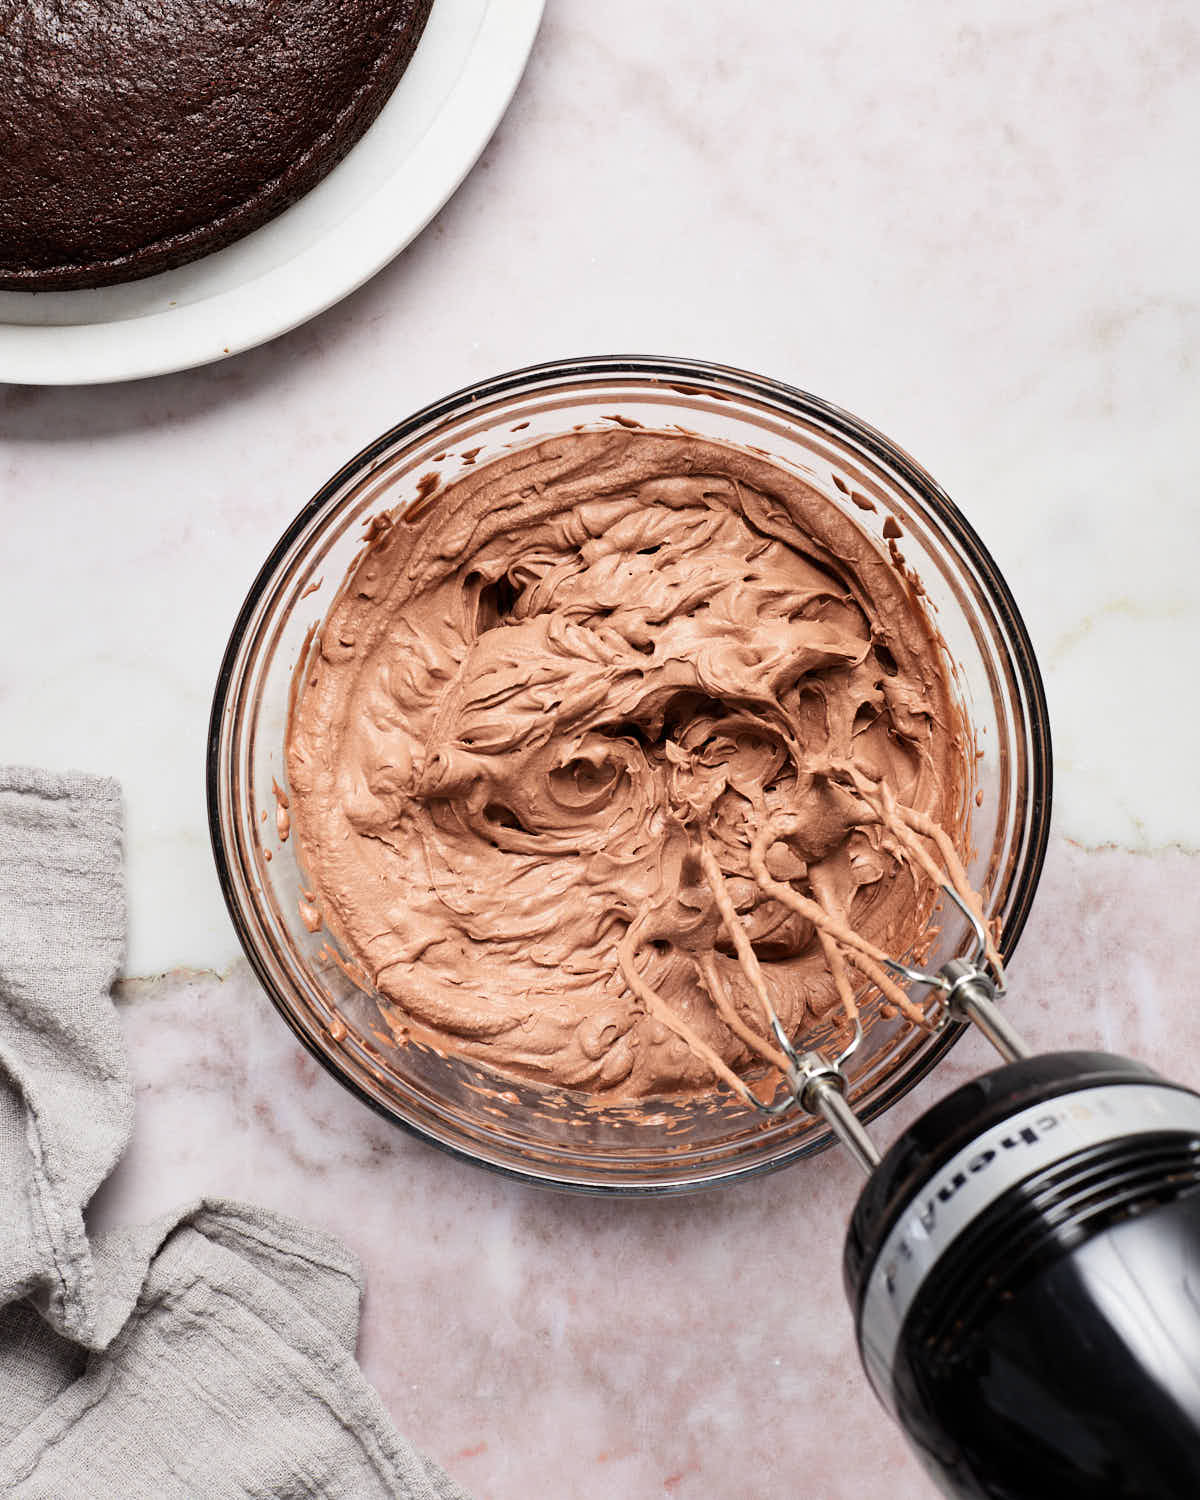 Chocolate whipped cream frosting being whipped together with an electric mixer in a glass bowl.